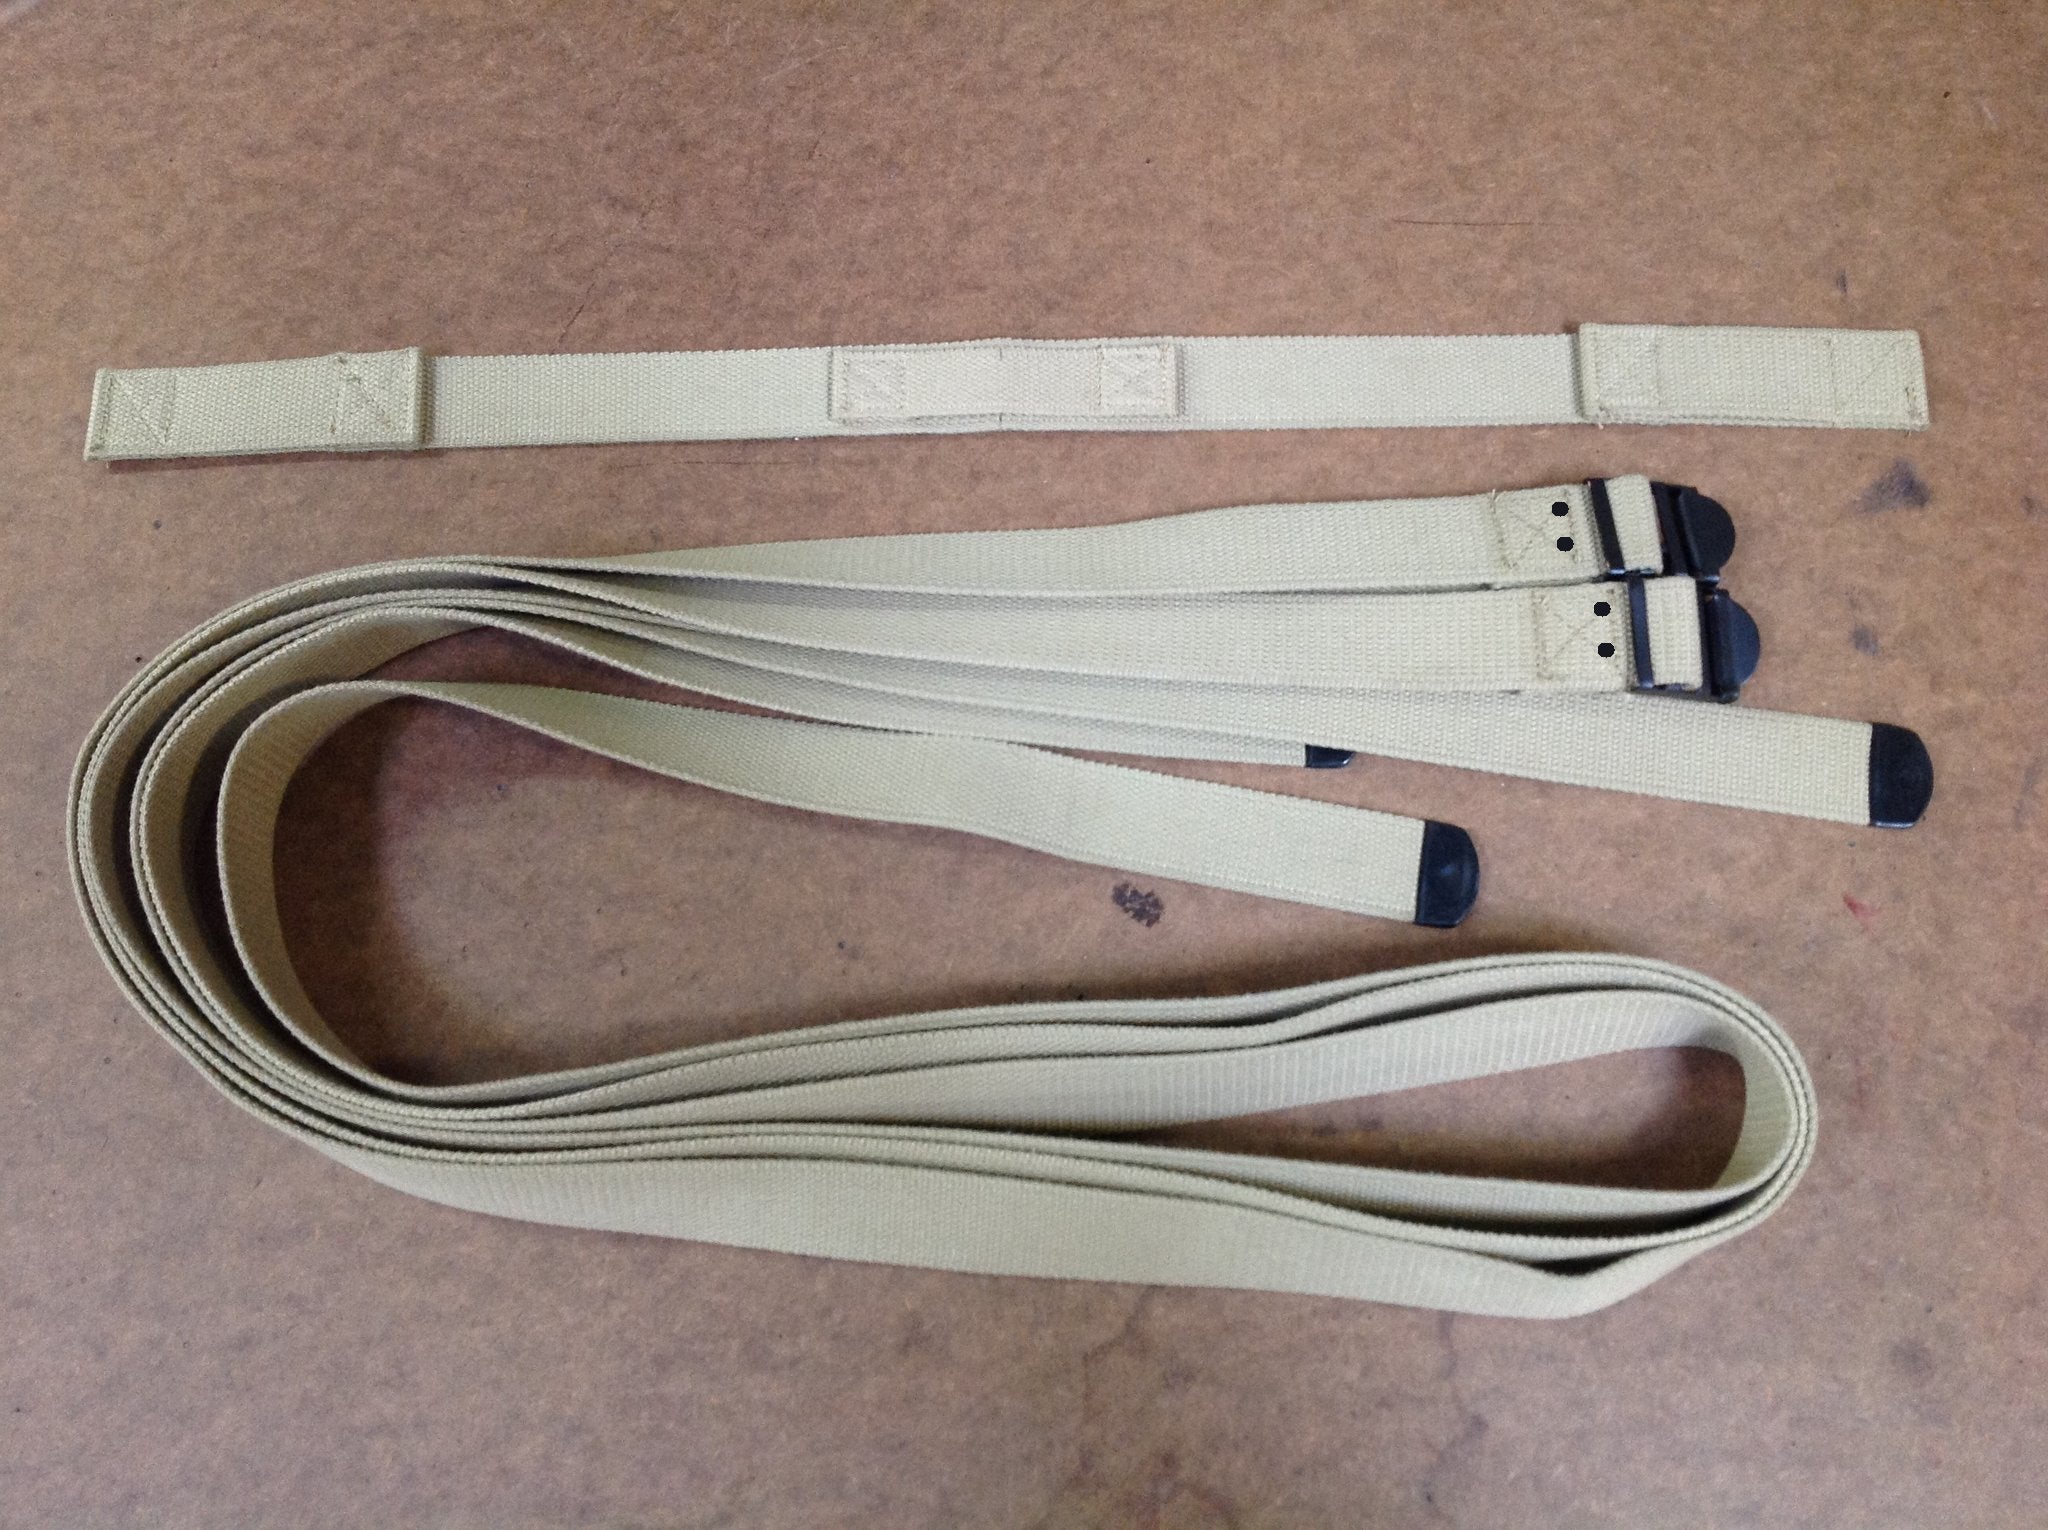 Straps, Bedding Roll, M1935 Officer's CLOSEOUT sold as-is. All sales final.